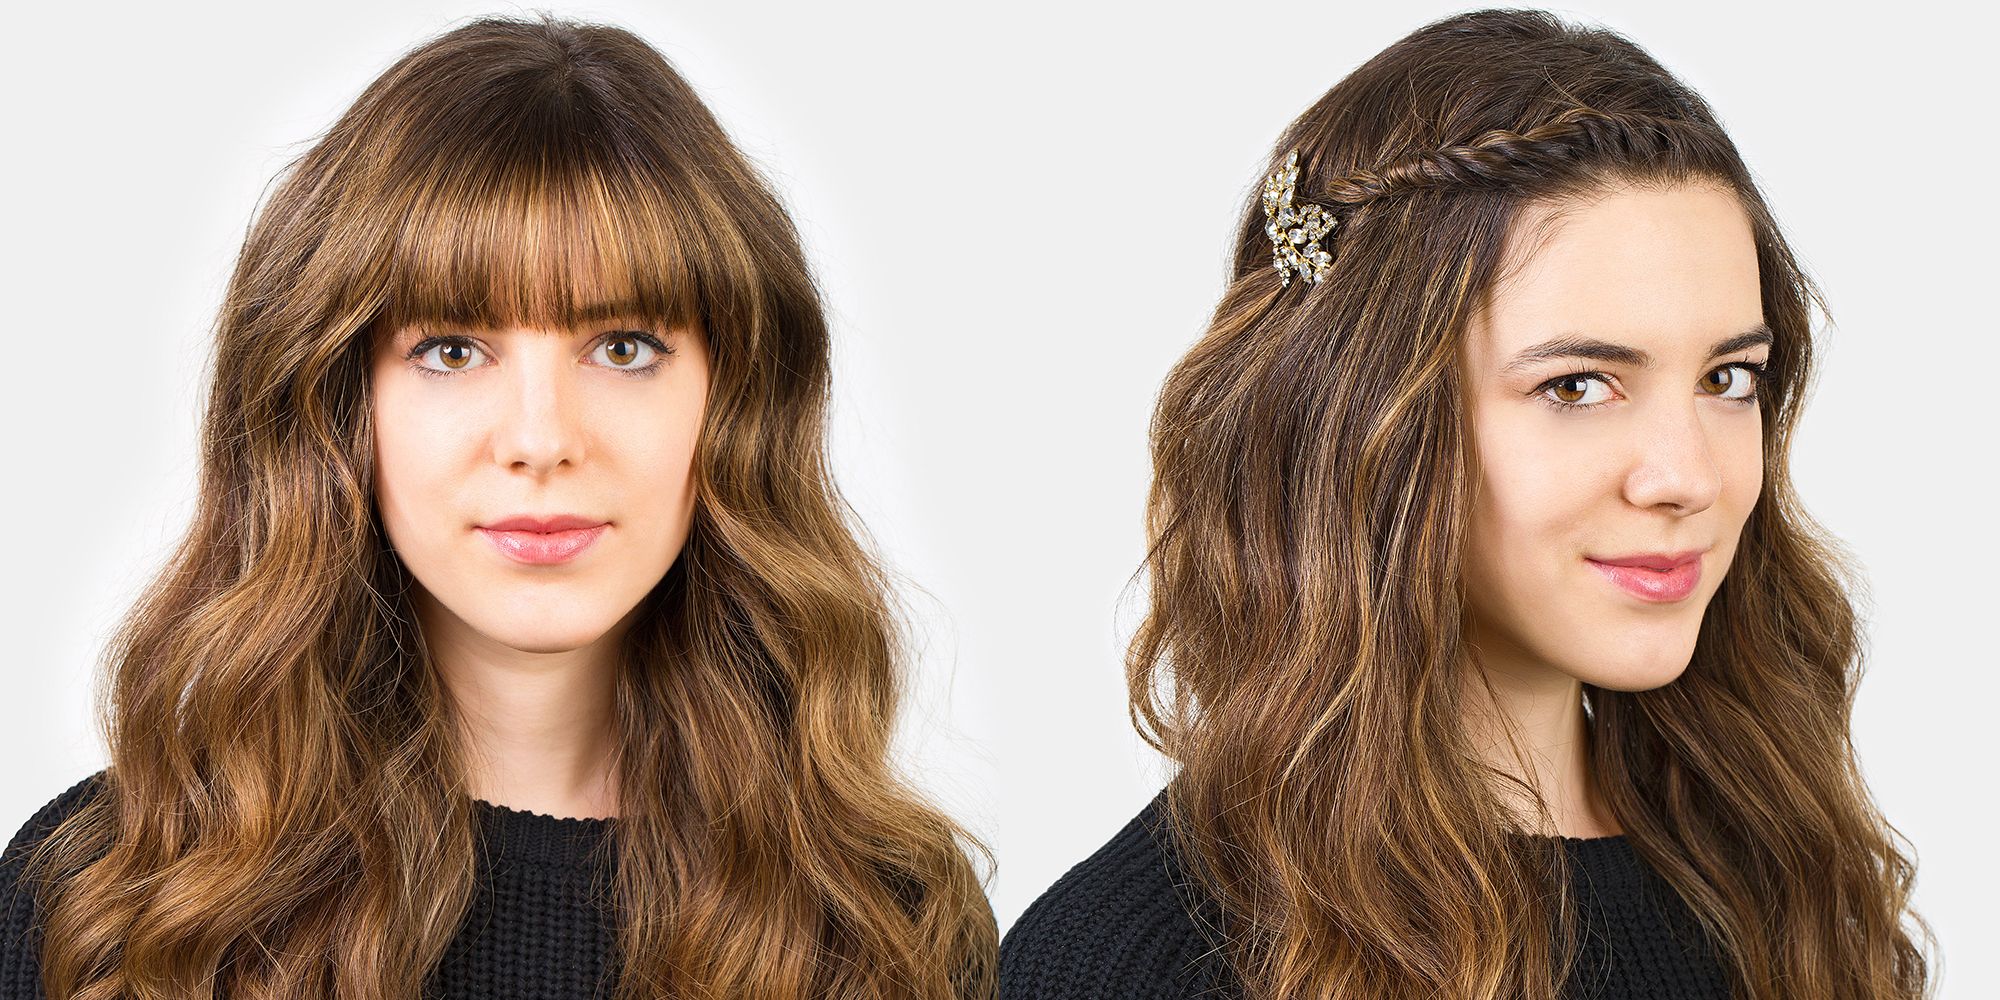 How to Style Bangs - 5 Hairstyles to Keep Your Bangs Out of Your Face